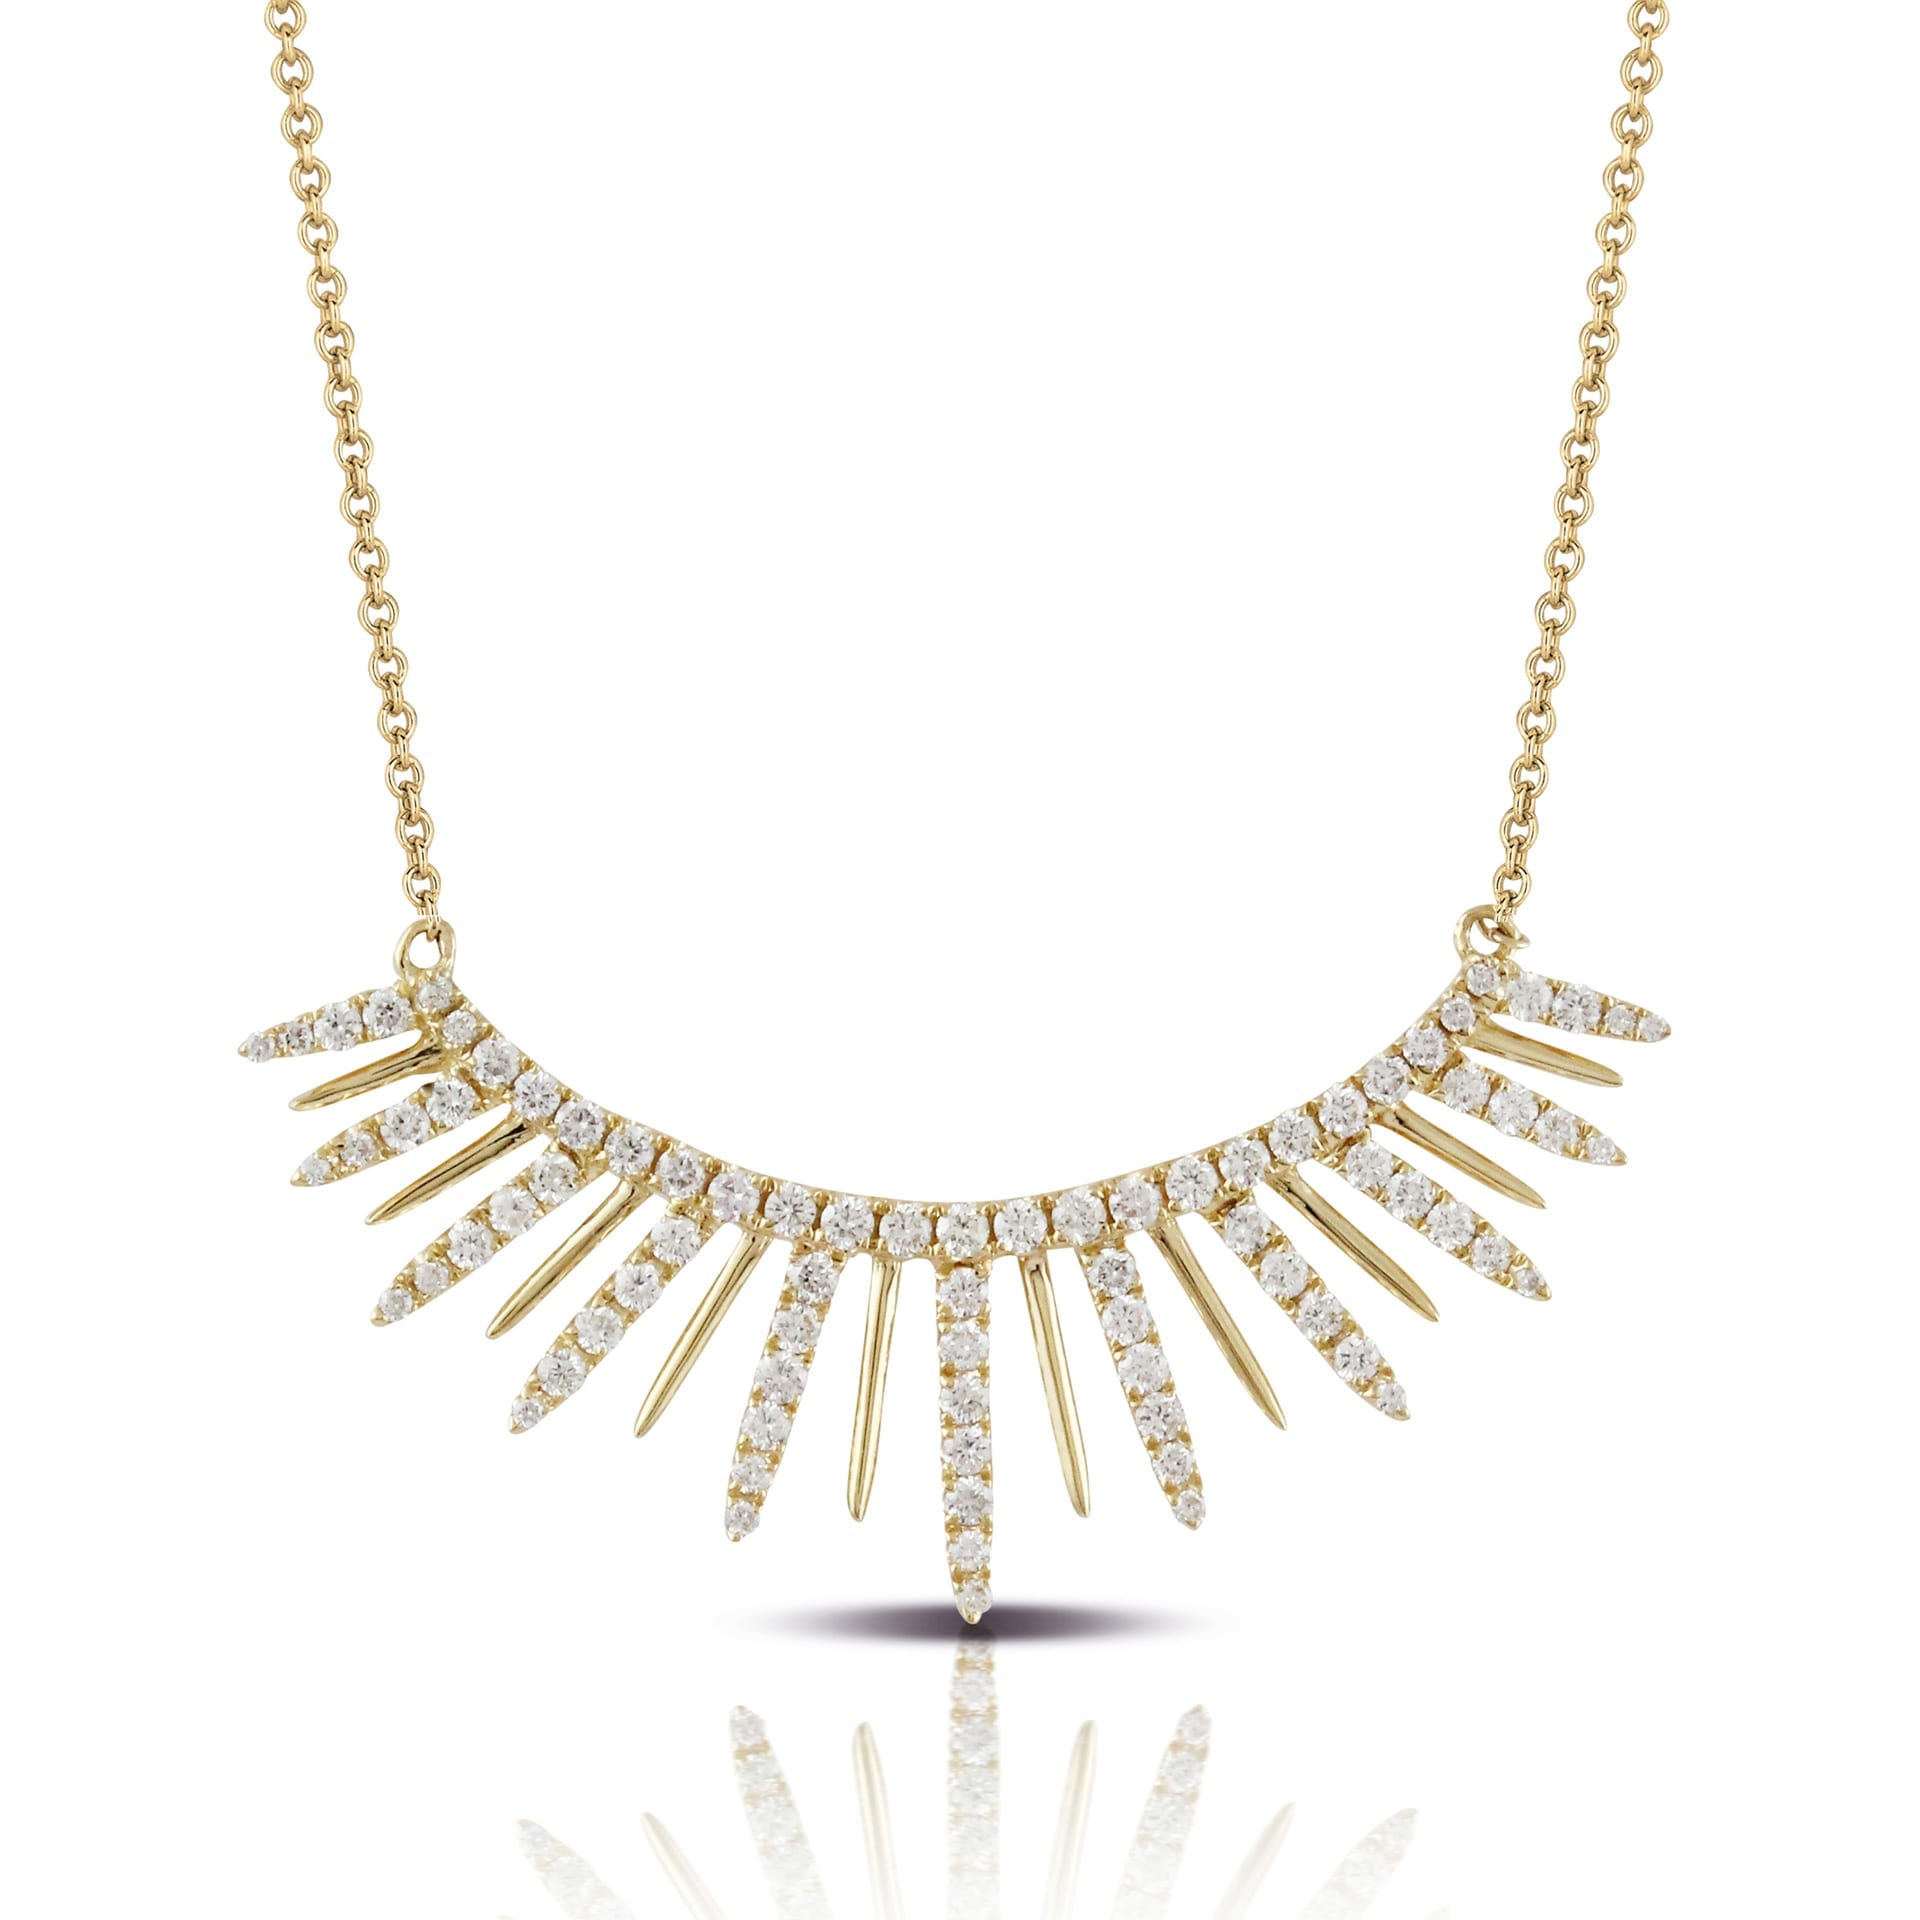 Flaring Shards Of Tapering 18k Yellow Gold And Diamonds On Classic Necklace accessorize your wedding dress